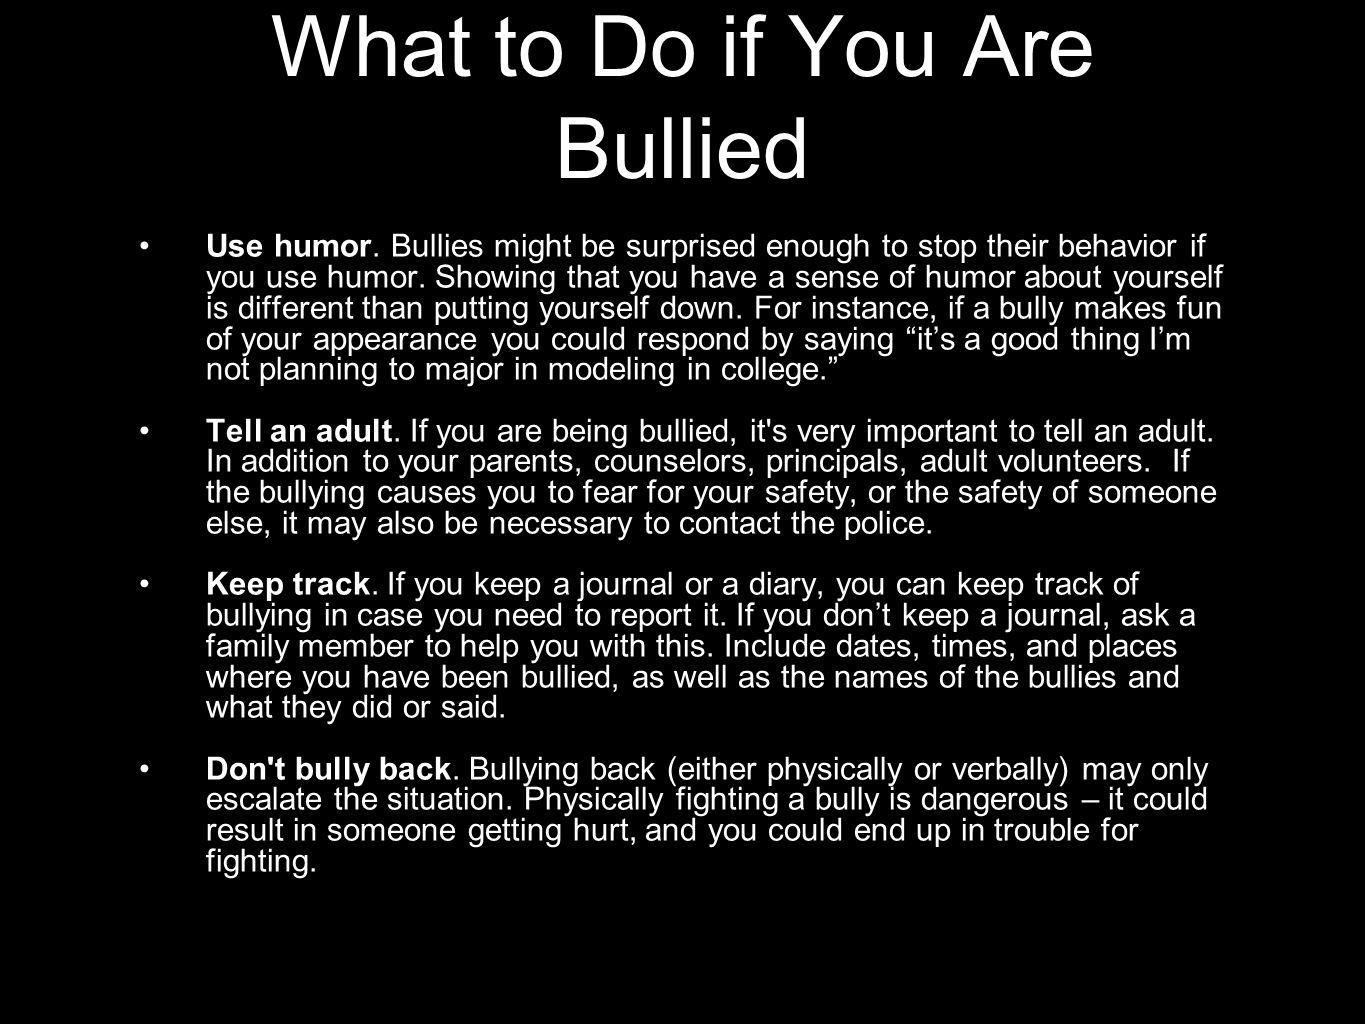 What to Do if You Are Bullied